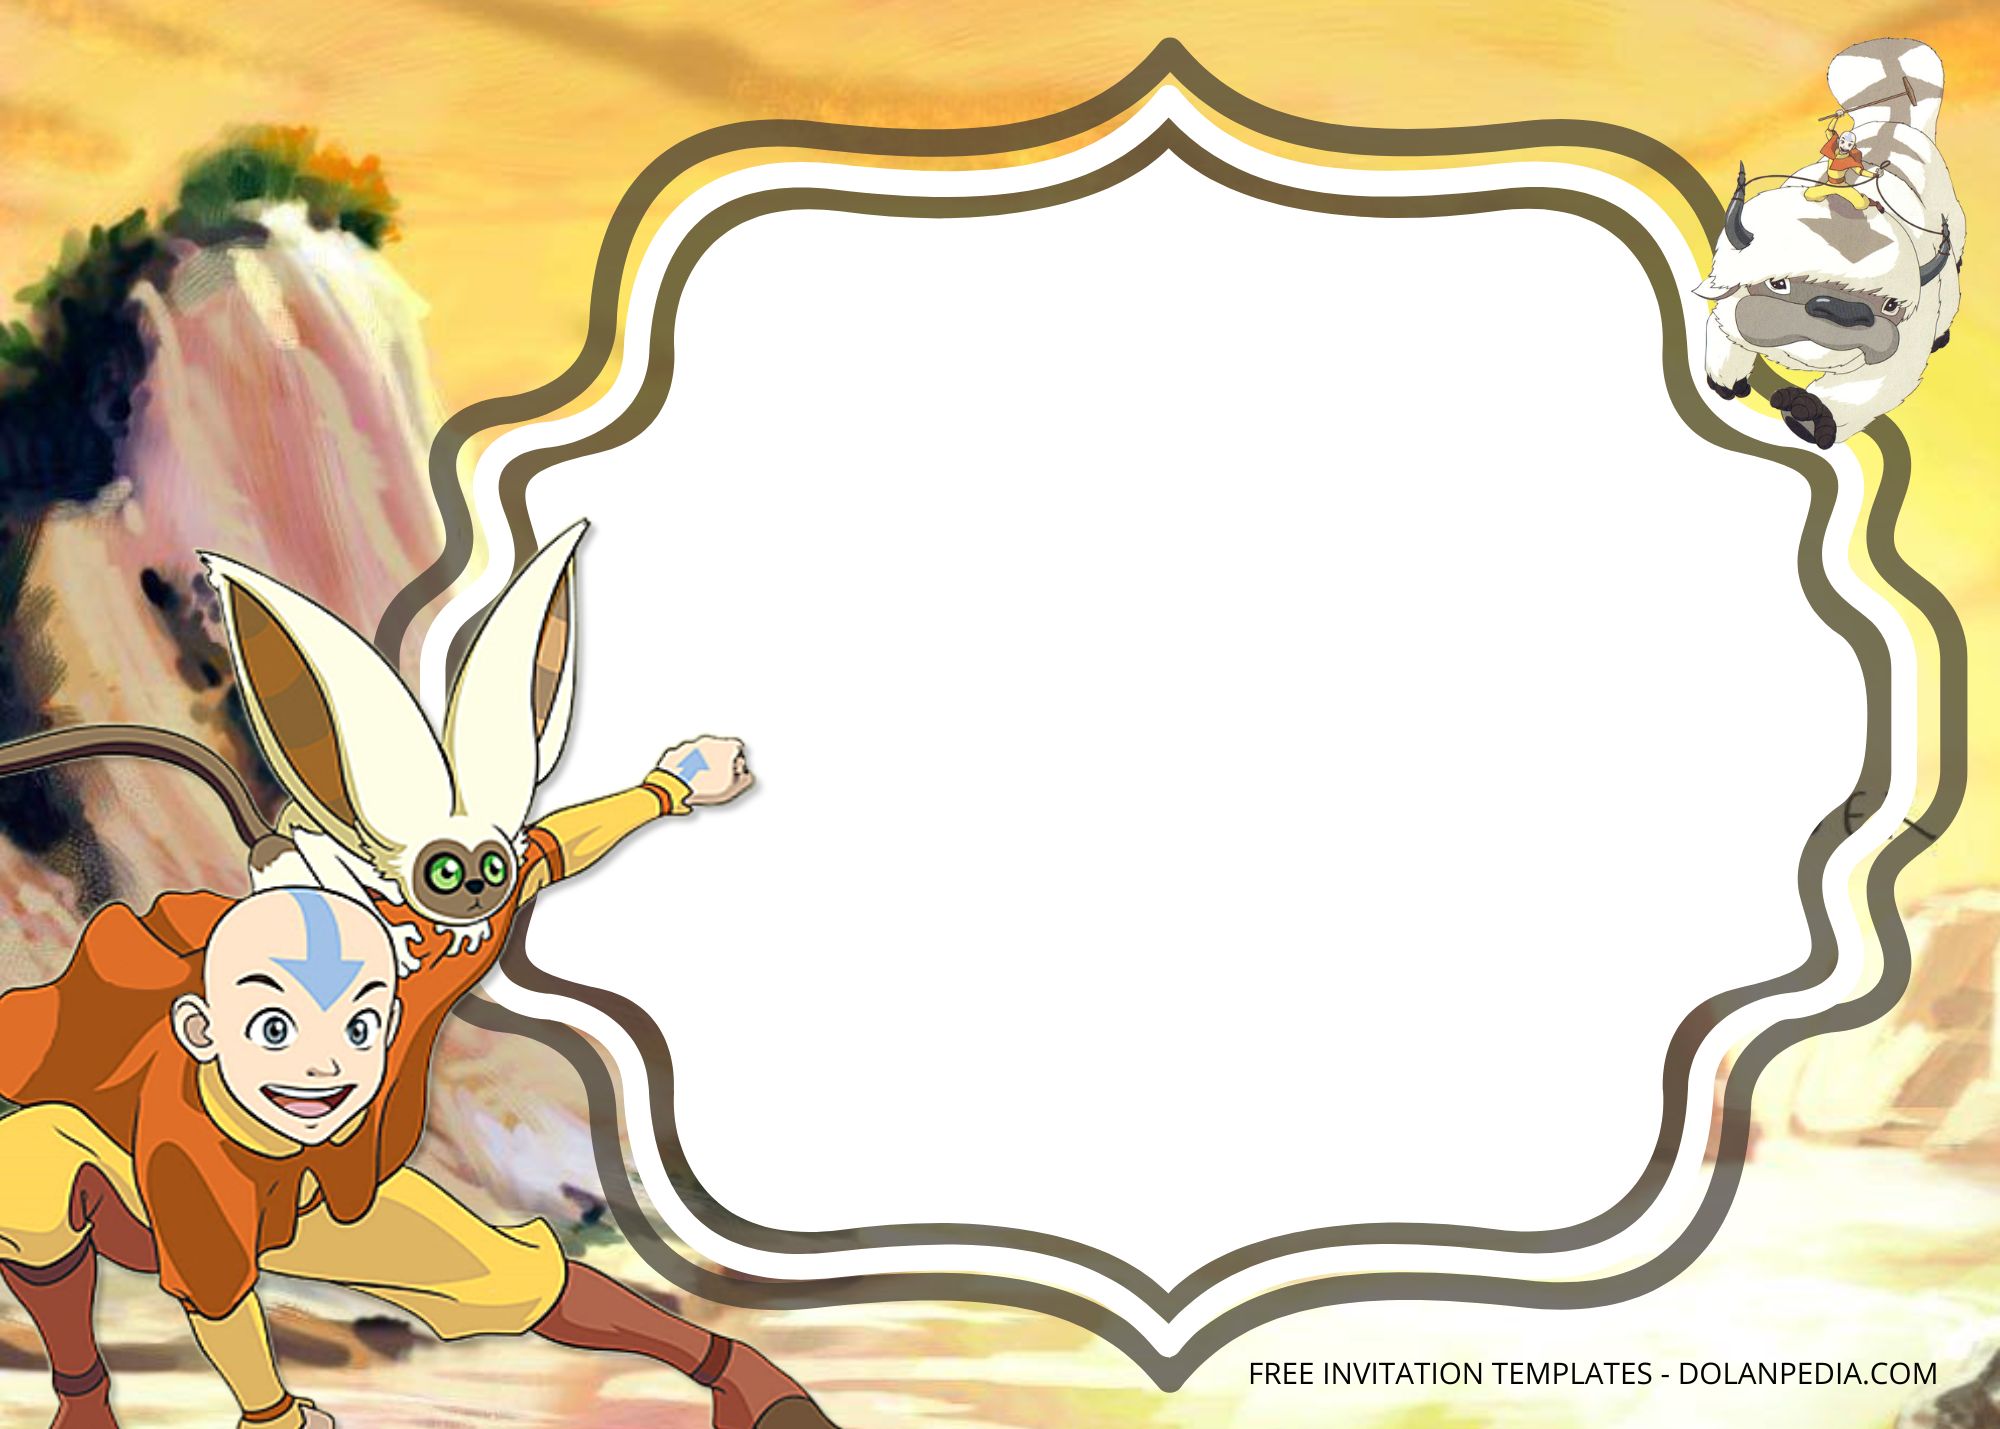 Blank Avatar The Legend of Aang Birthday Invitation Templates FOur